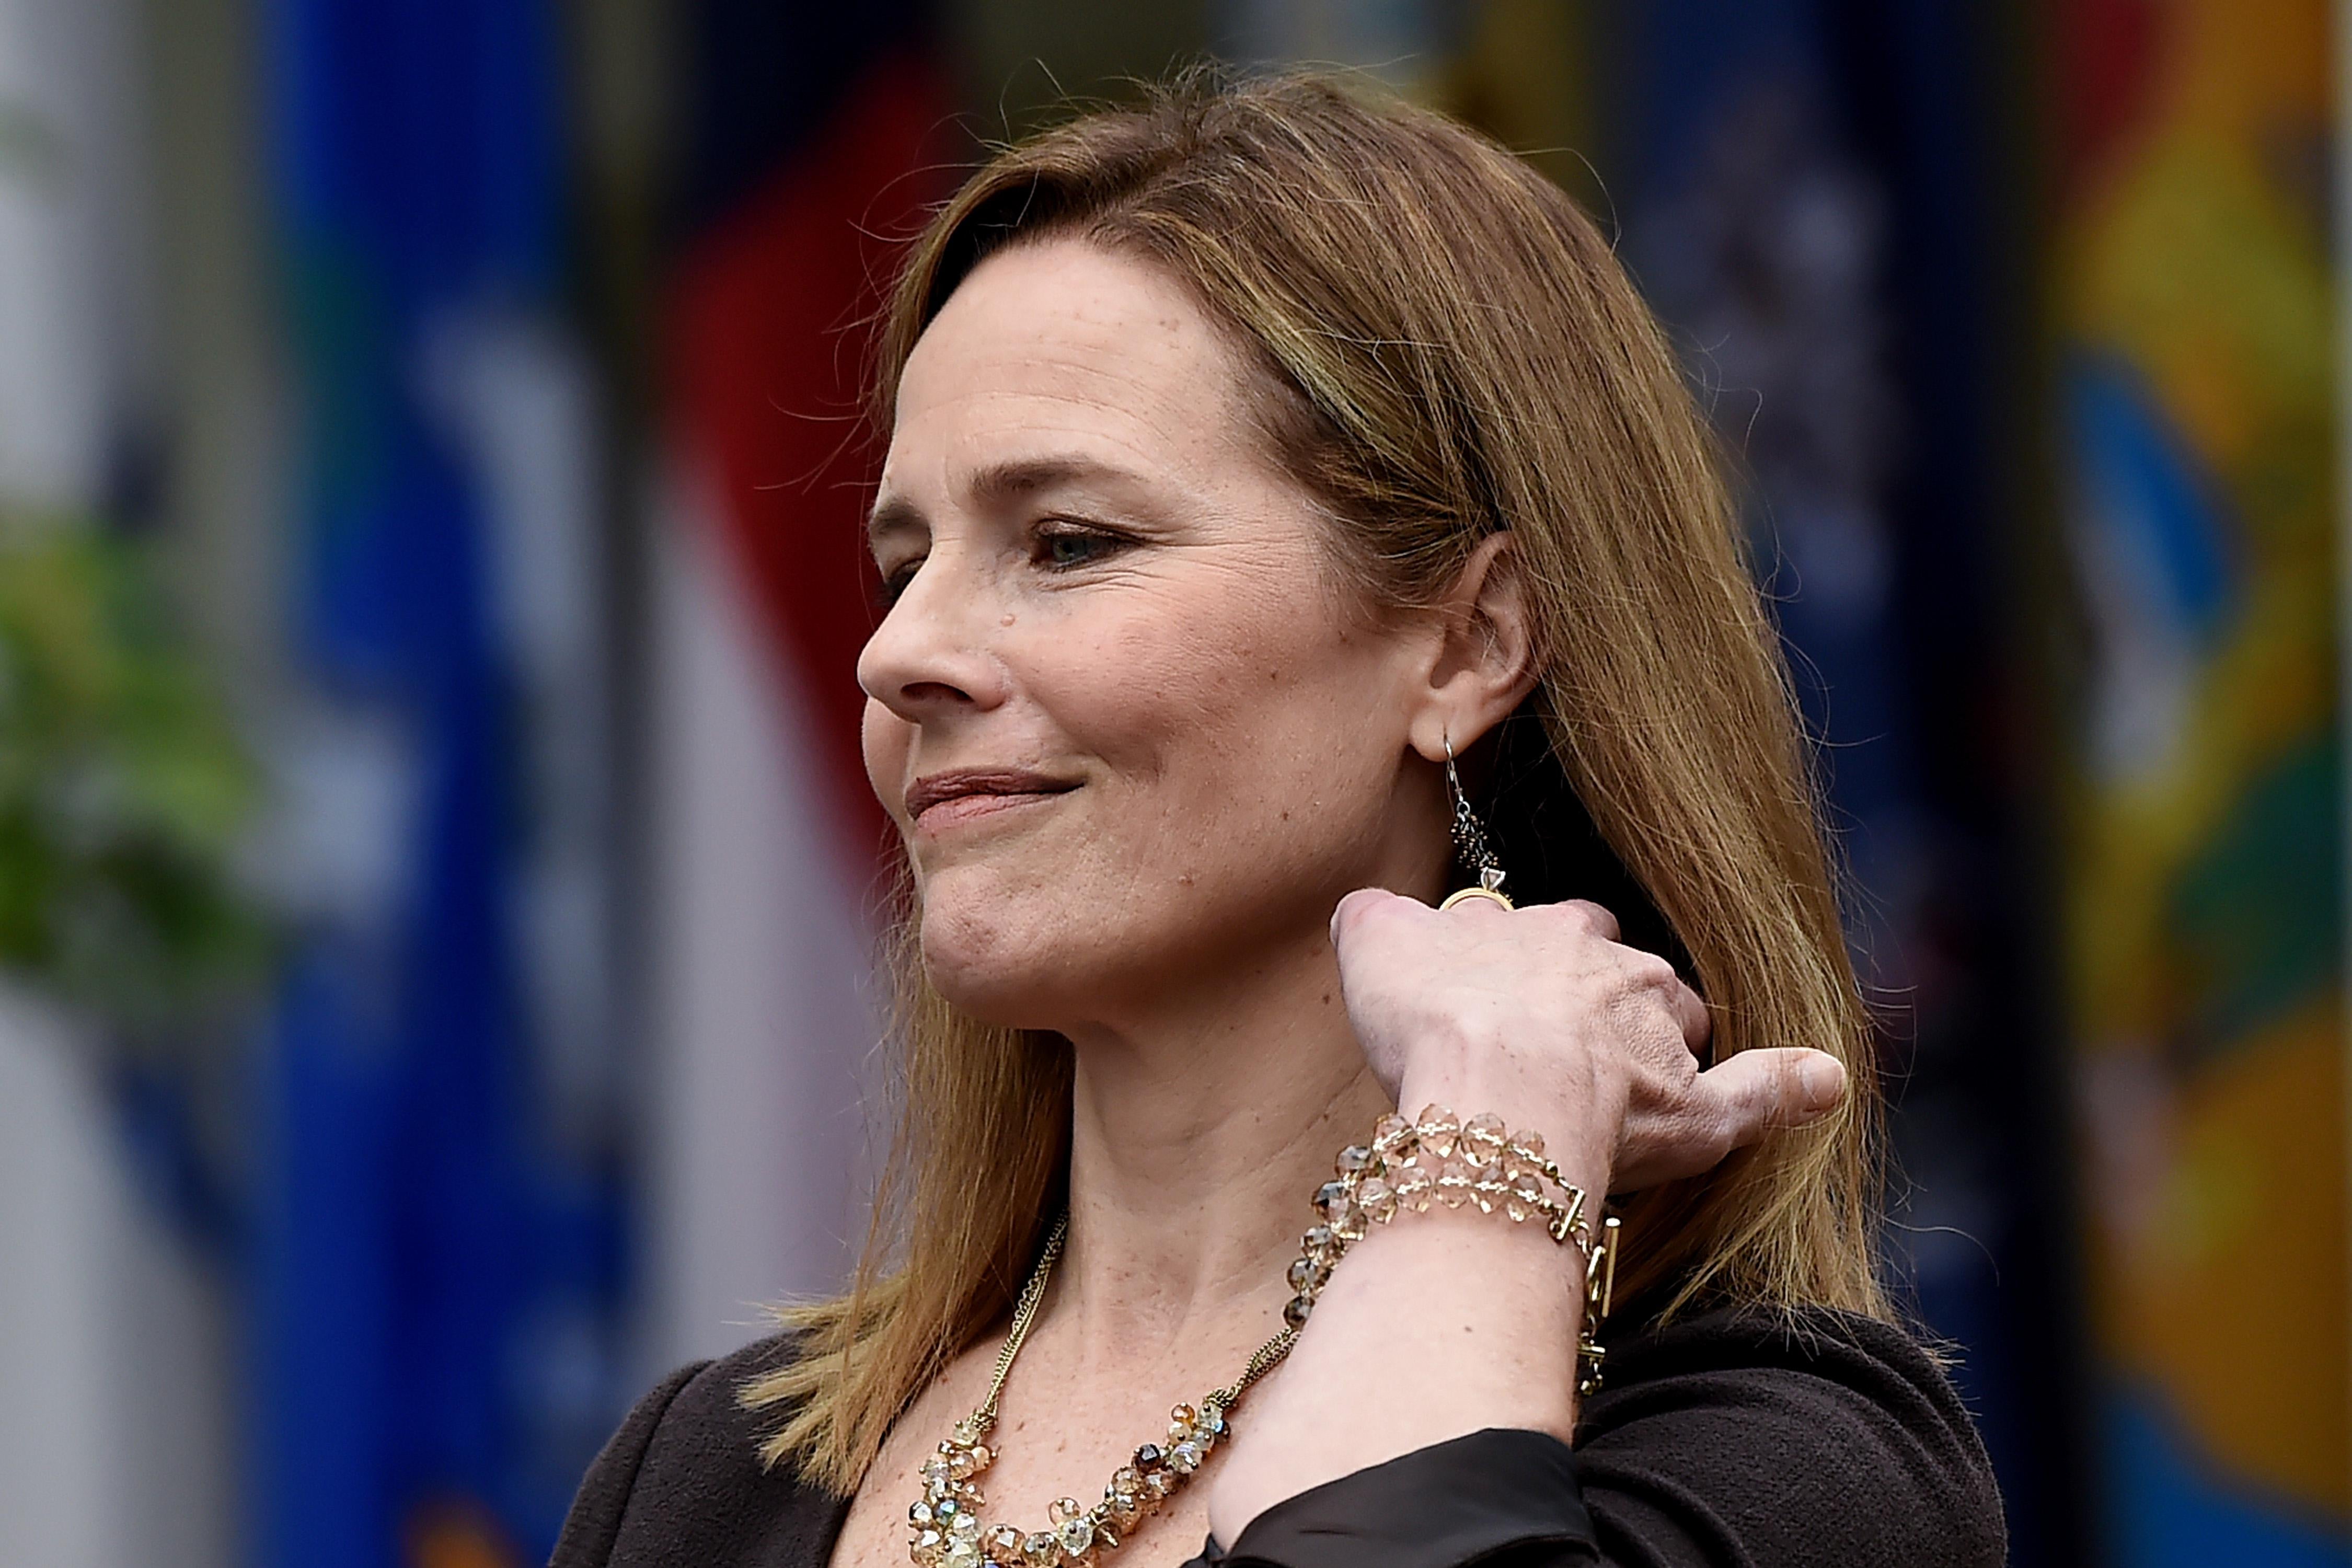 Judge Amy Coney Barrett speaks after being nominated to the Supreme Court by President Donald Trump in the Rose Garden of the White House in Washington, DC on September 26, 2020. 